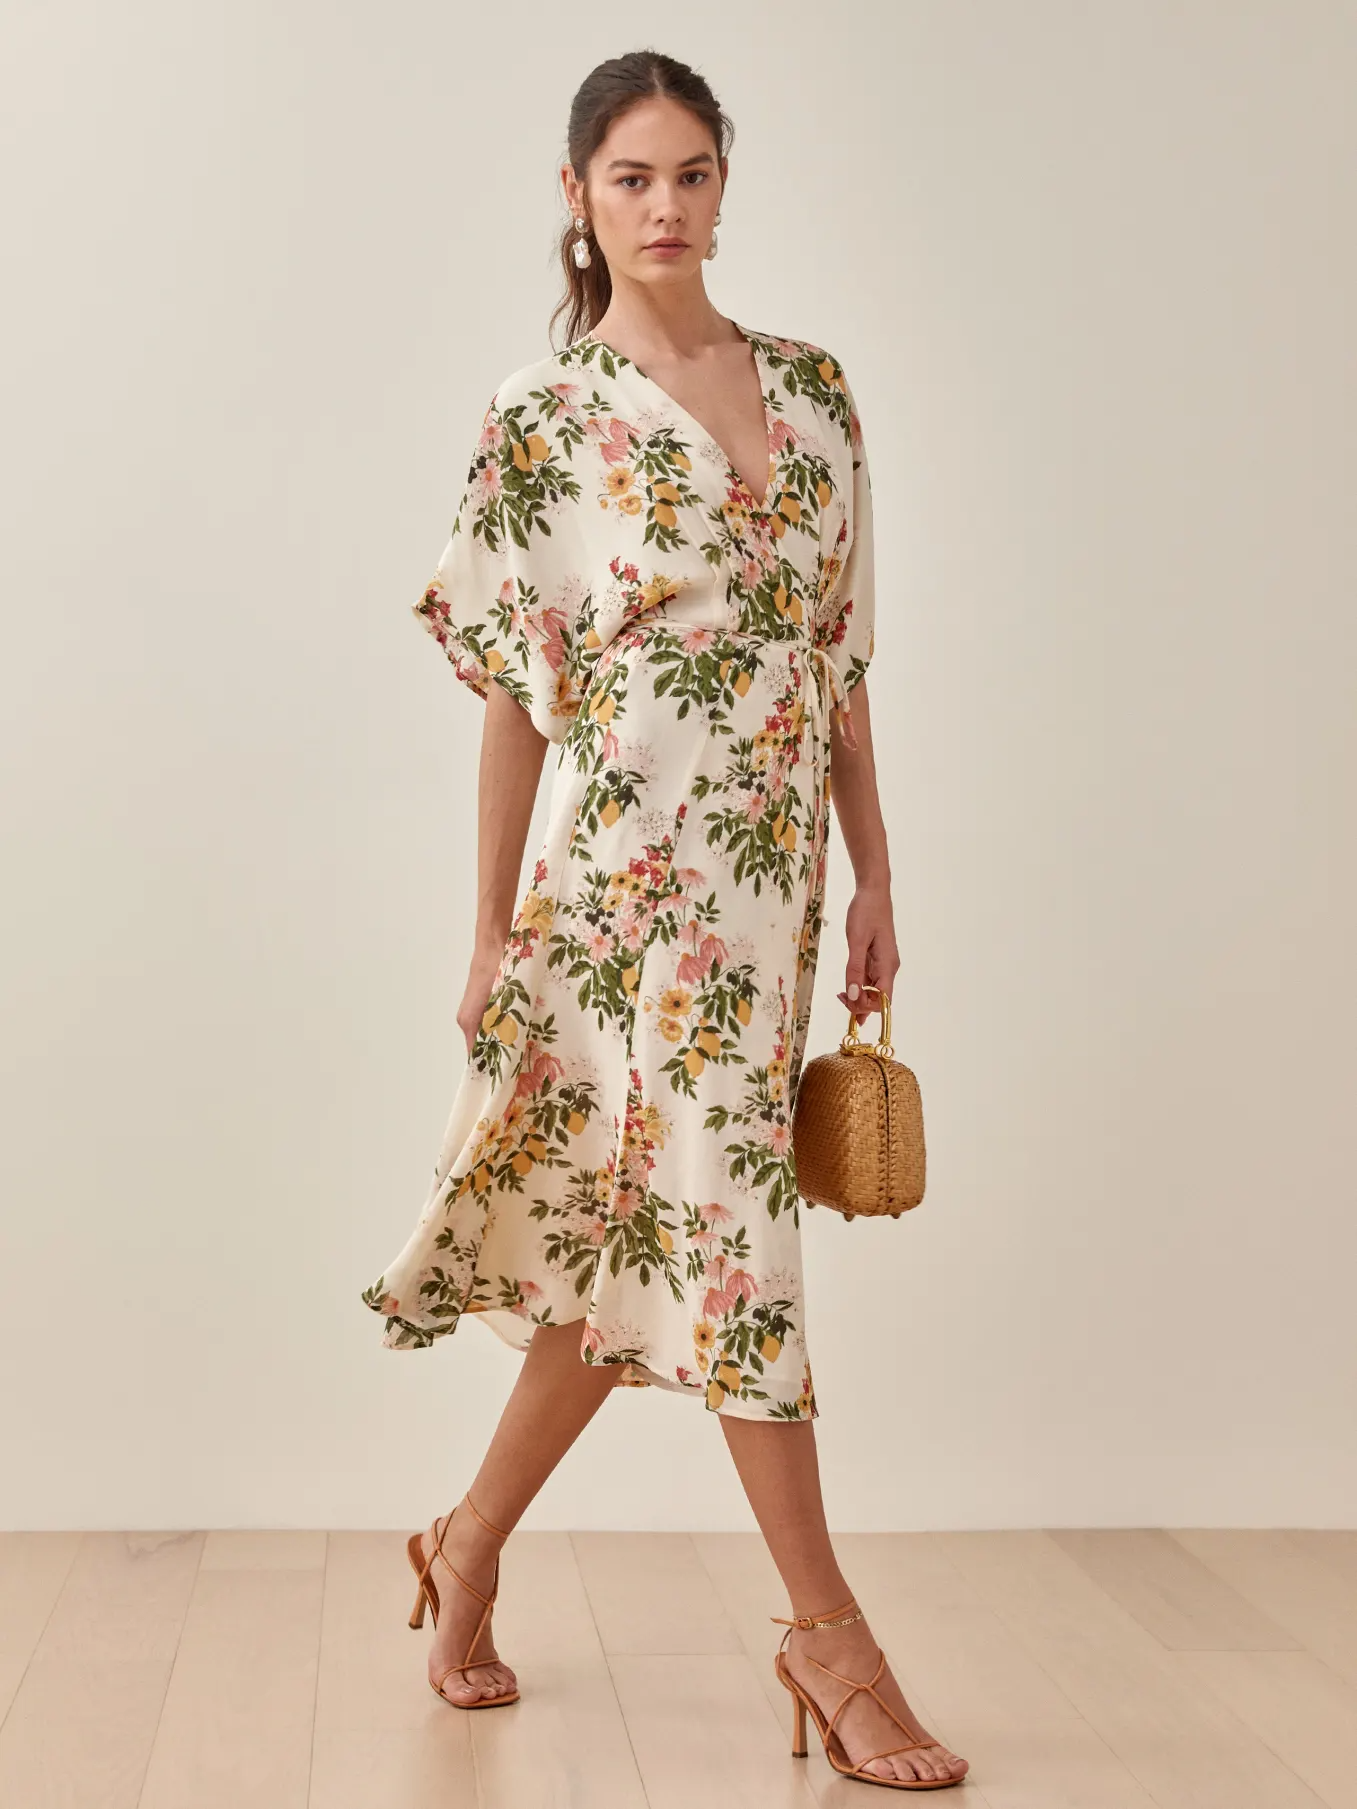 Summer Wedding Guest Dresses That Are ...